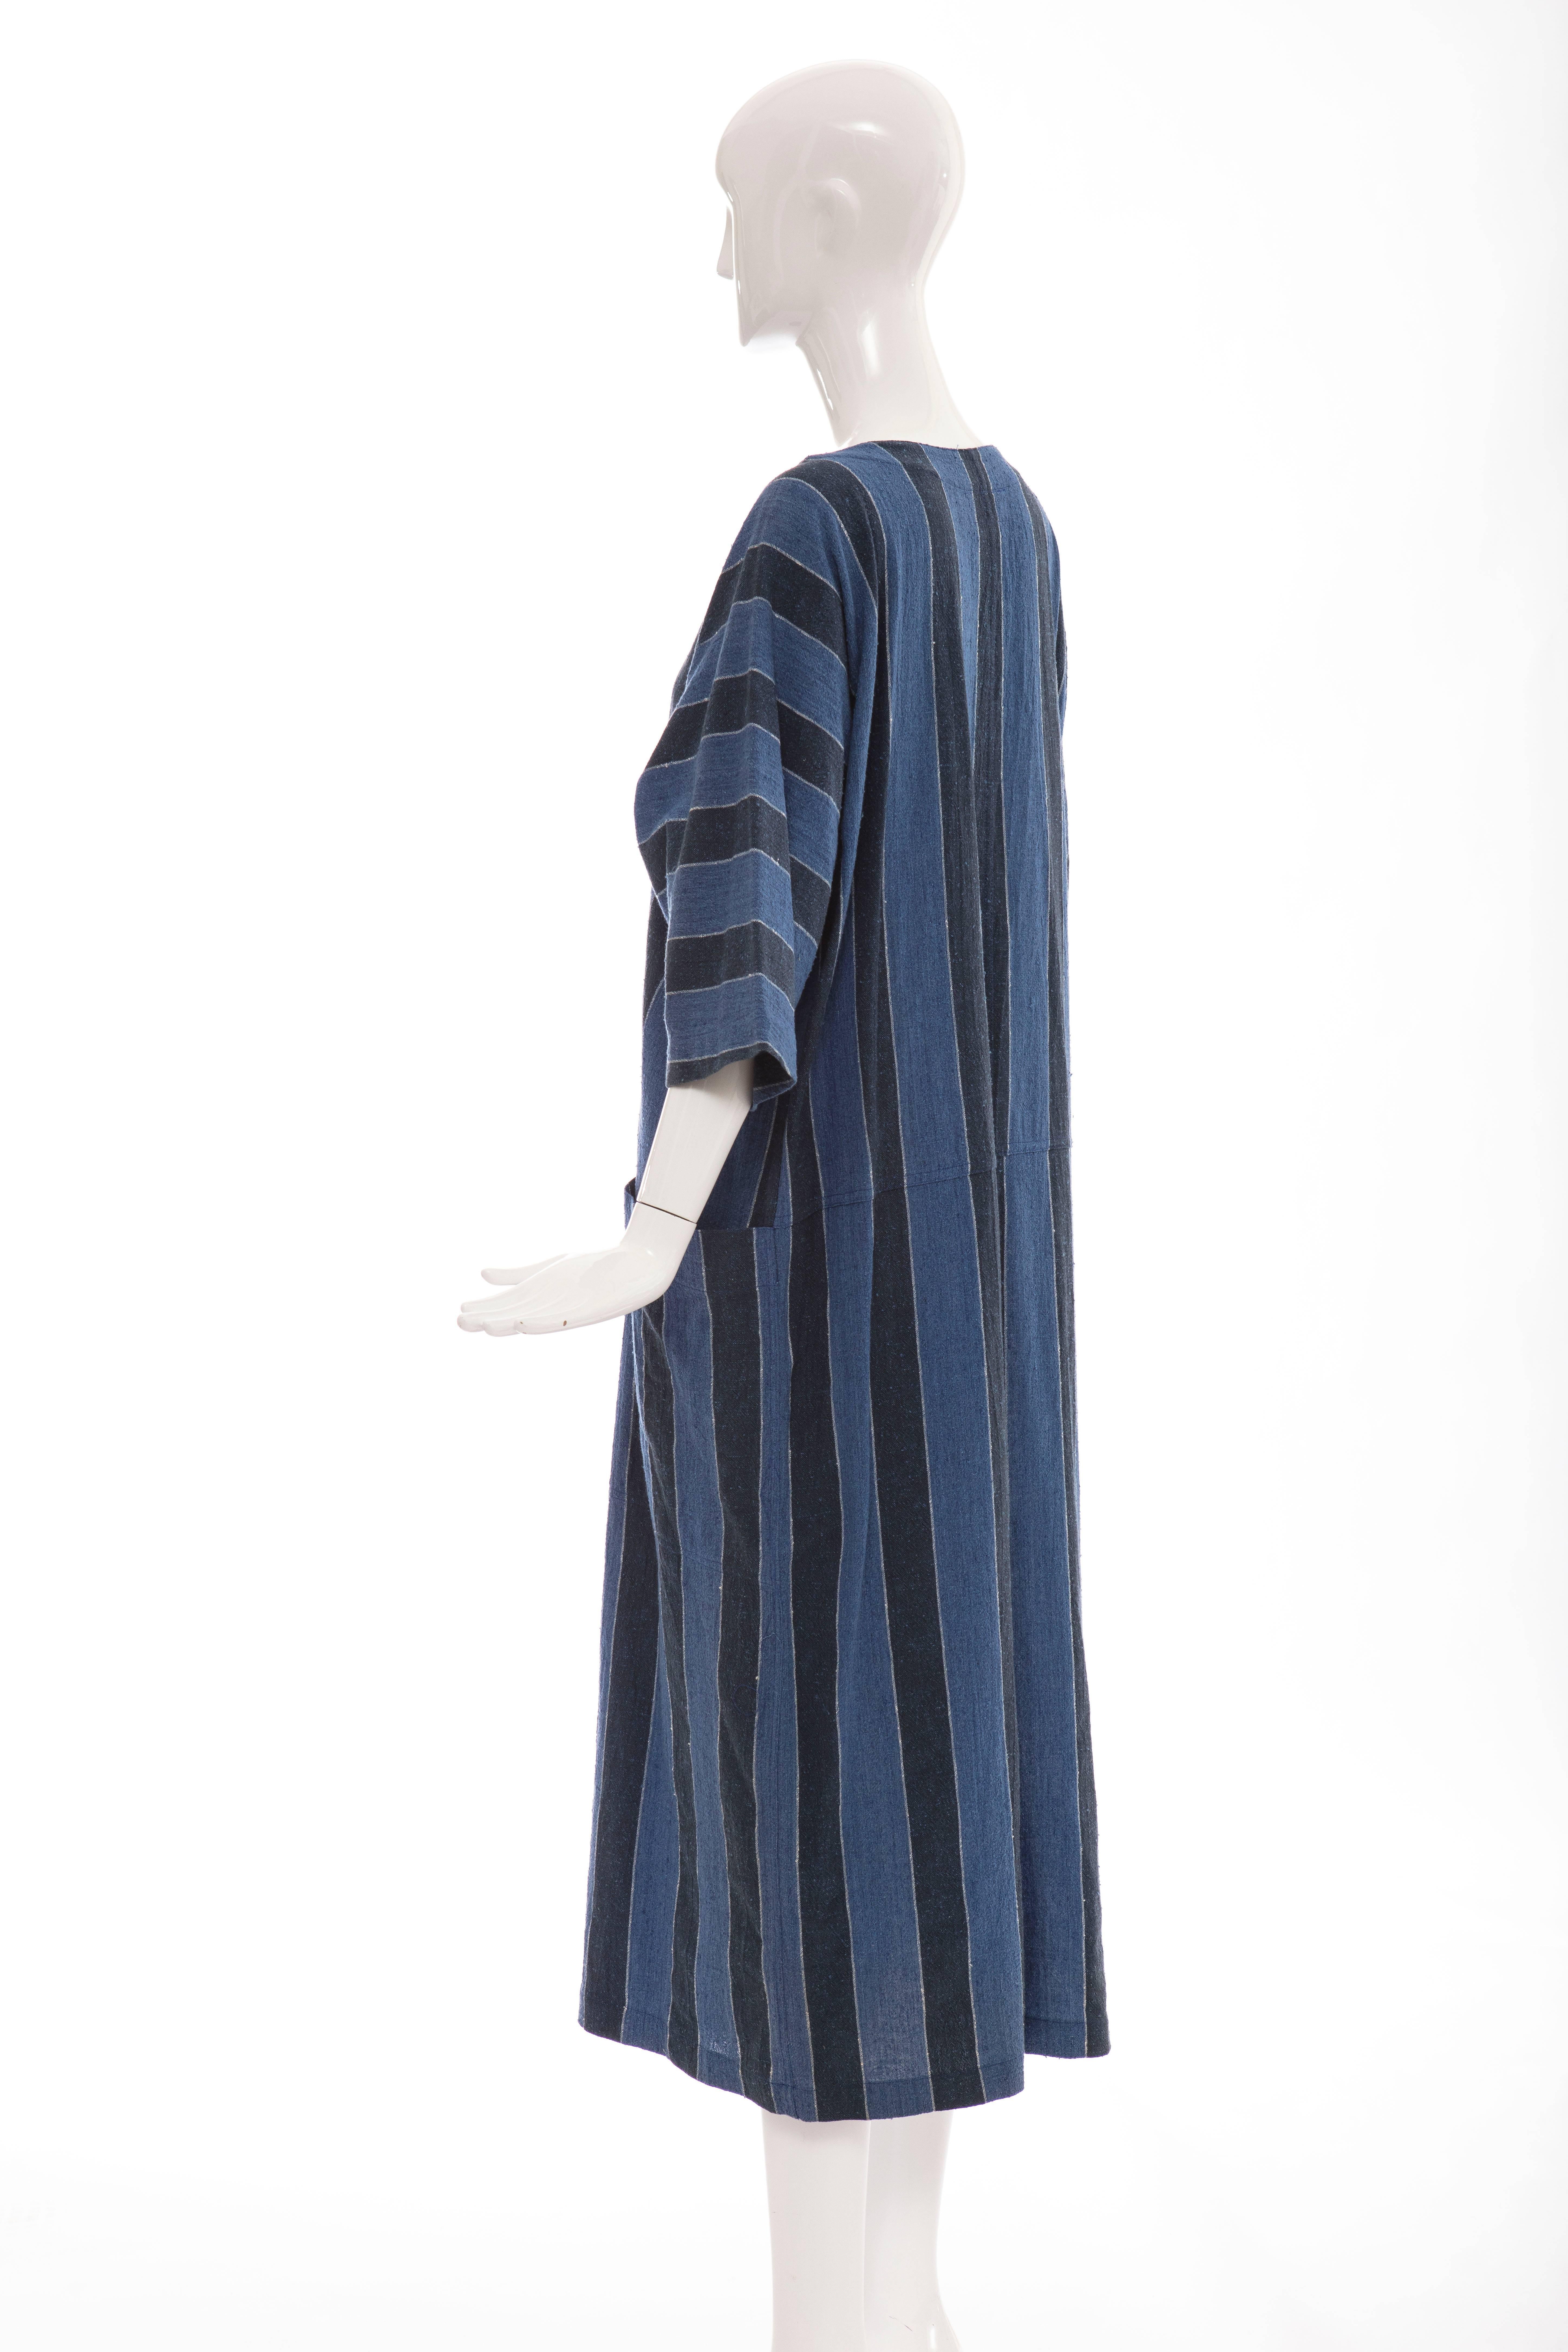 Issey Miyake Plantation Woven Cotton Dress, Circa: 1980's For Sale 1